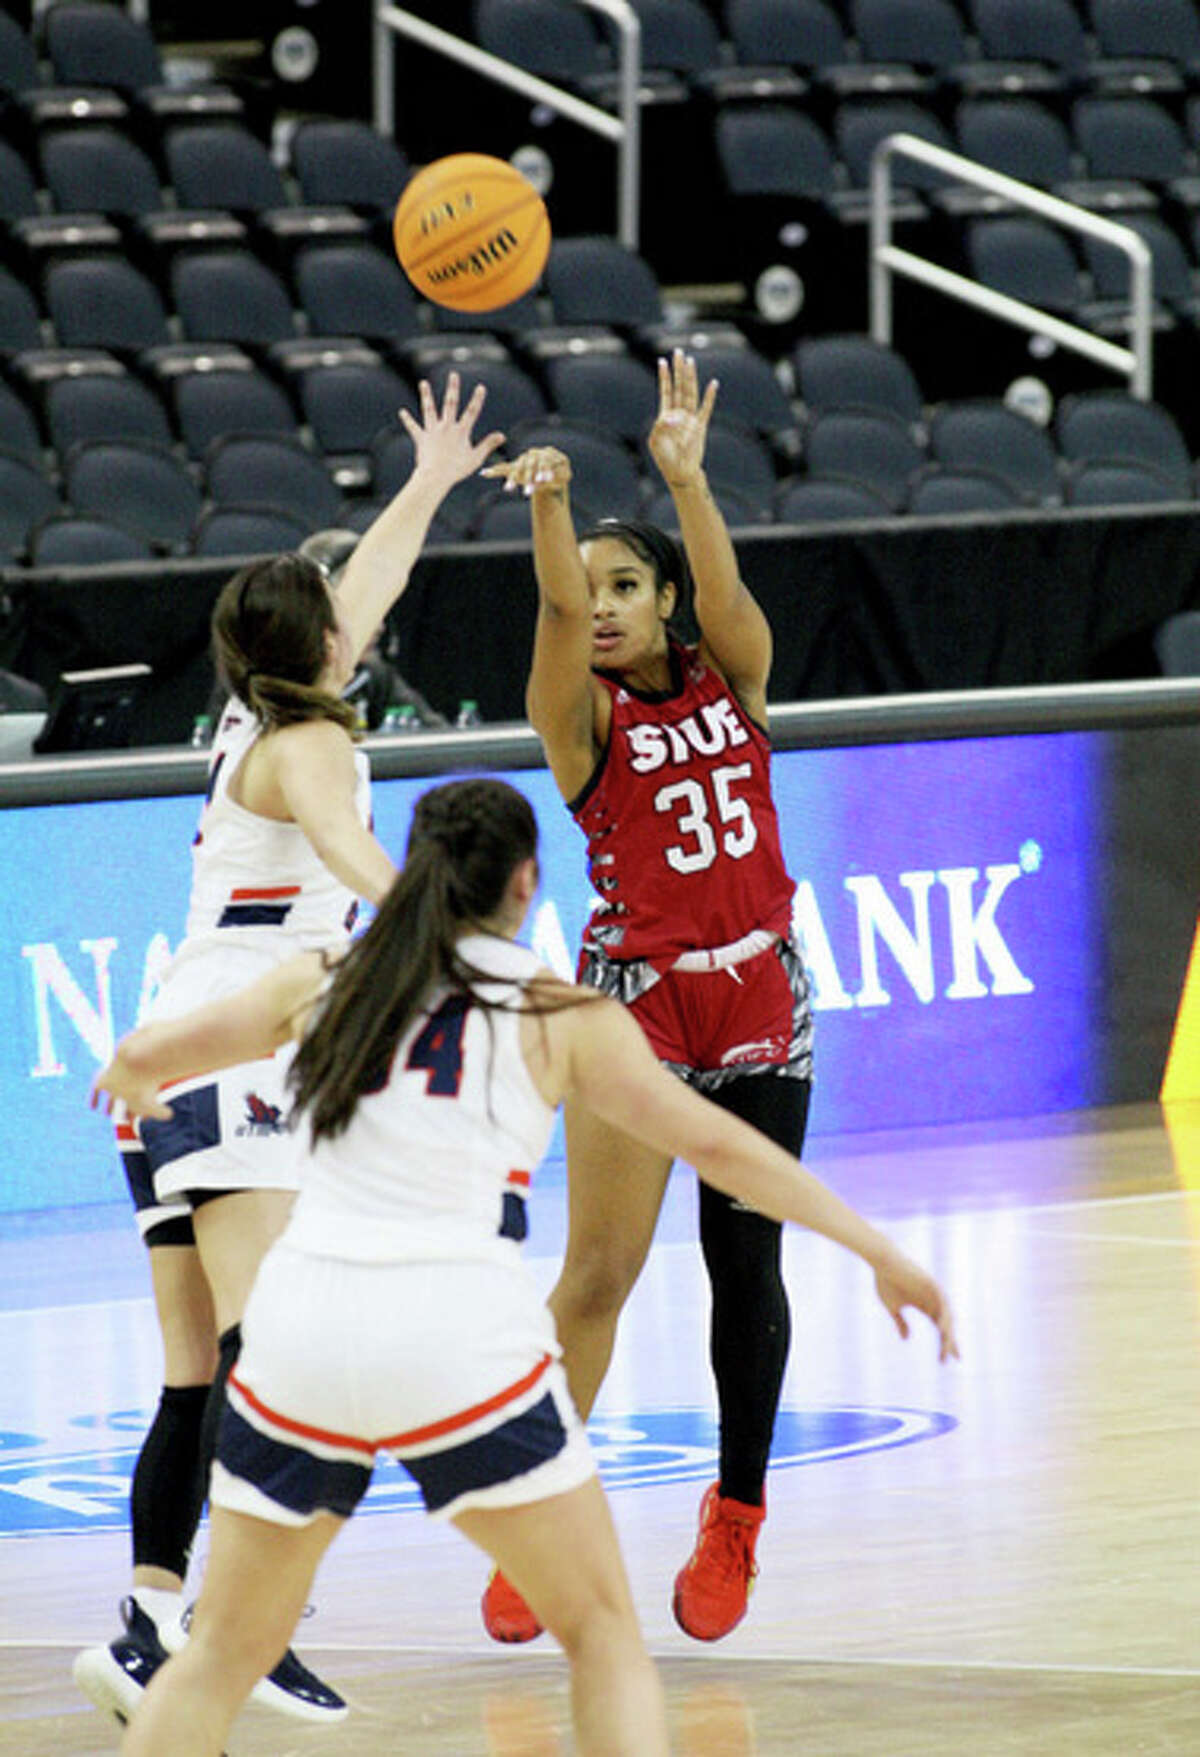 Mikala Hall of SIUE (35) puts up a shot against Tennessee-Martin in Wednesday's Ohio Valley Tournament game at the Ford Center in Evansville, Ind.